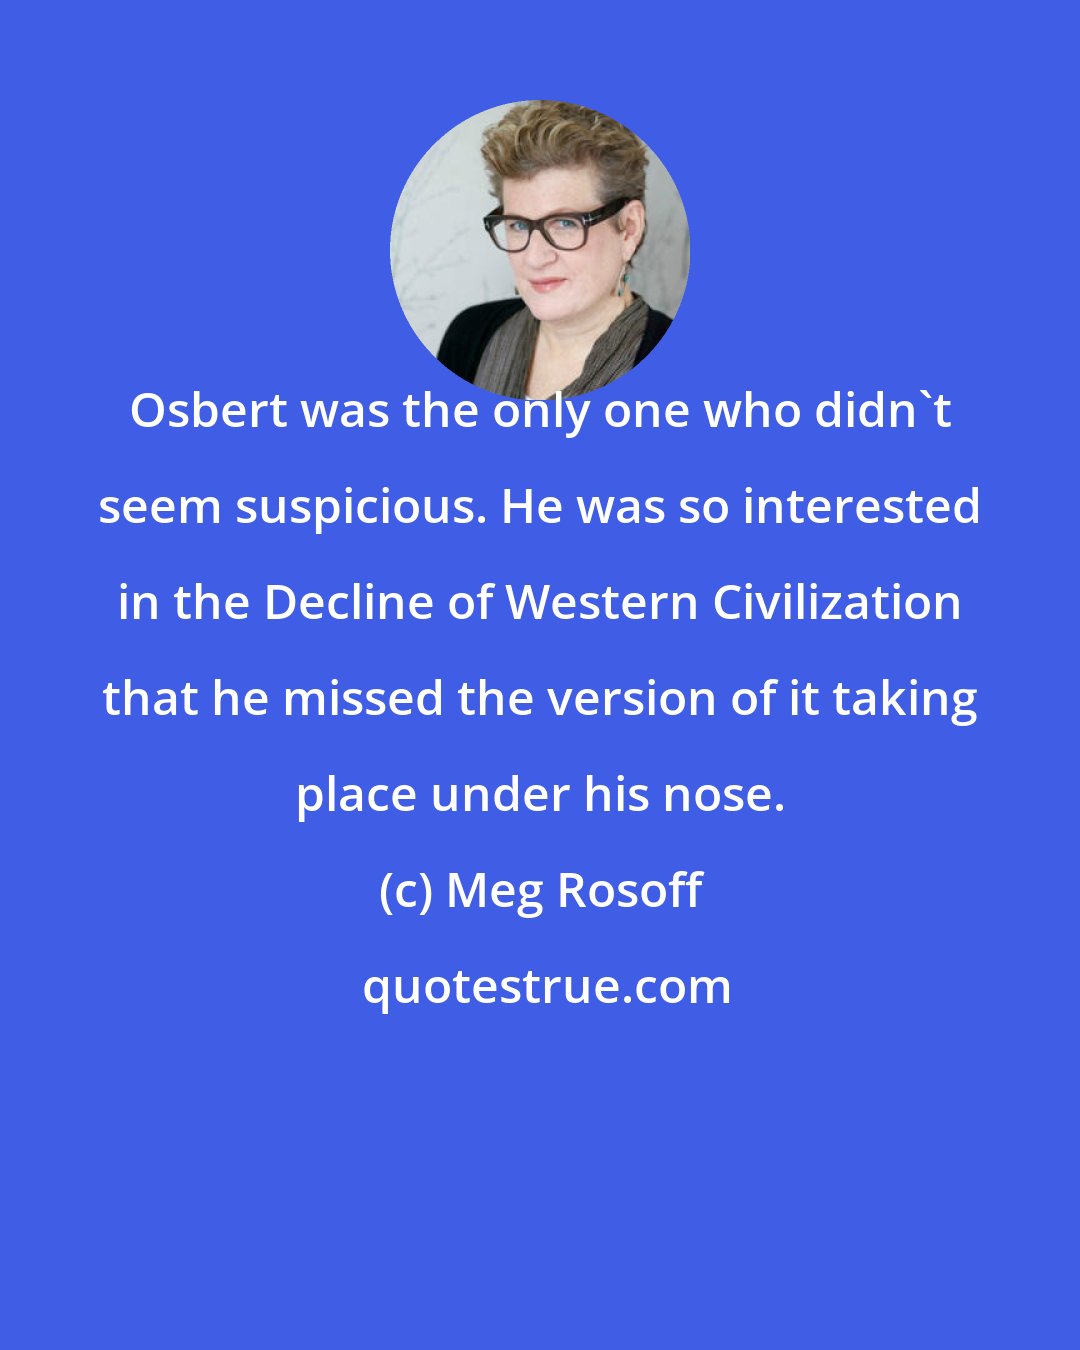 Meg Rosoff: Osbert was the only one who didn't seem suspicious. He was so interested in the Decline of Western Civilization that he missed the version of it taking place under his nose.